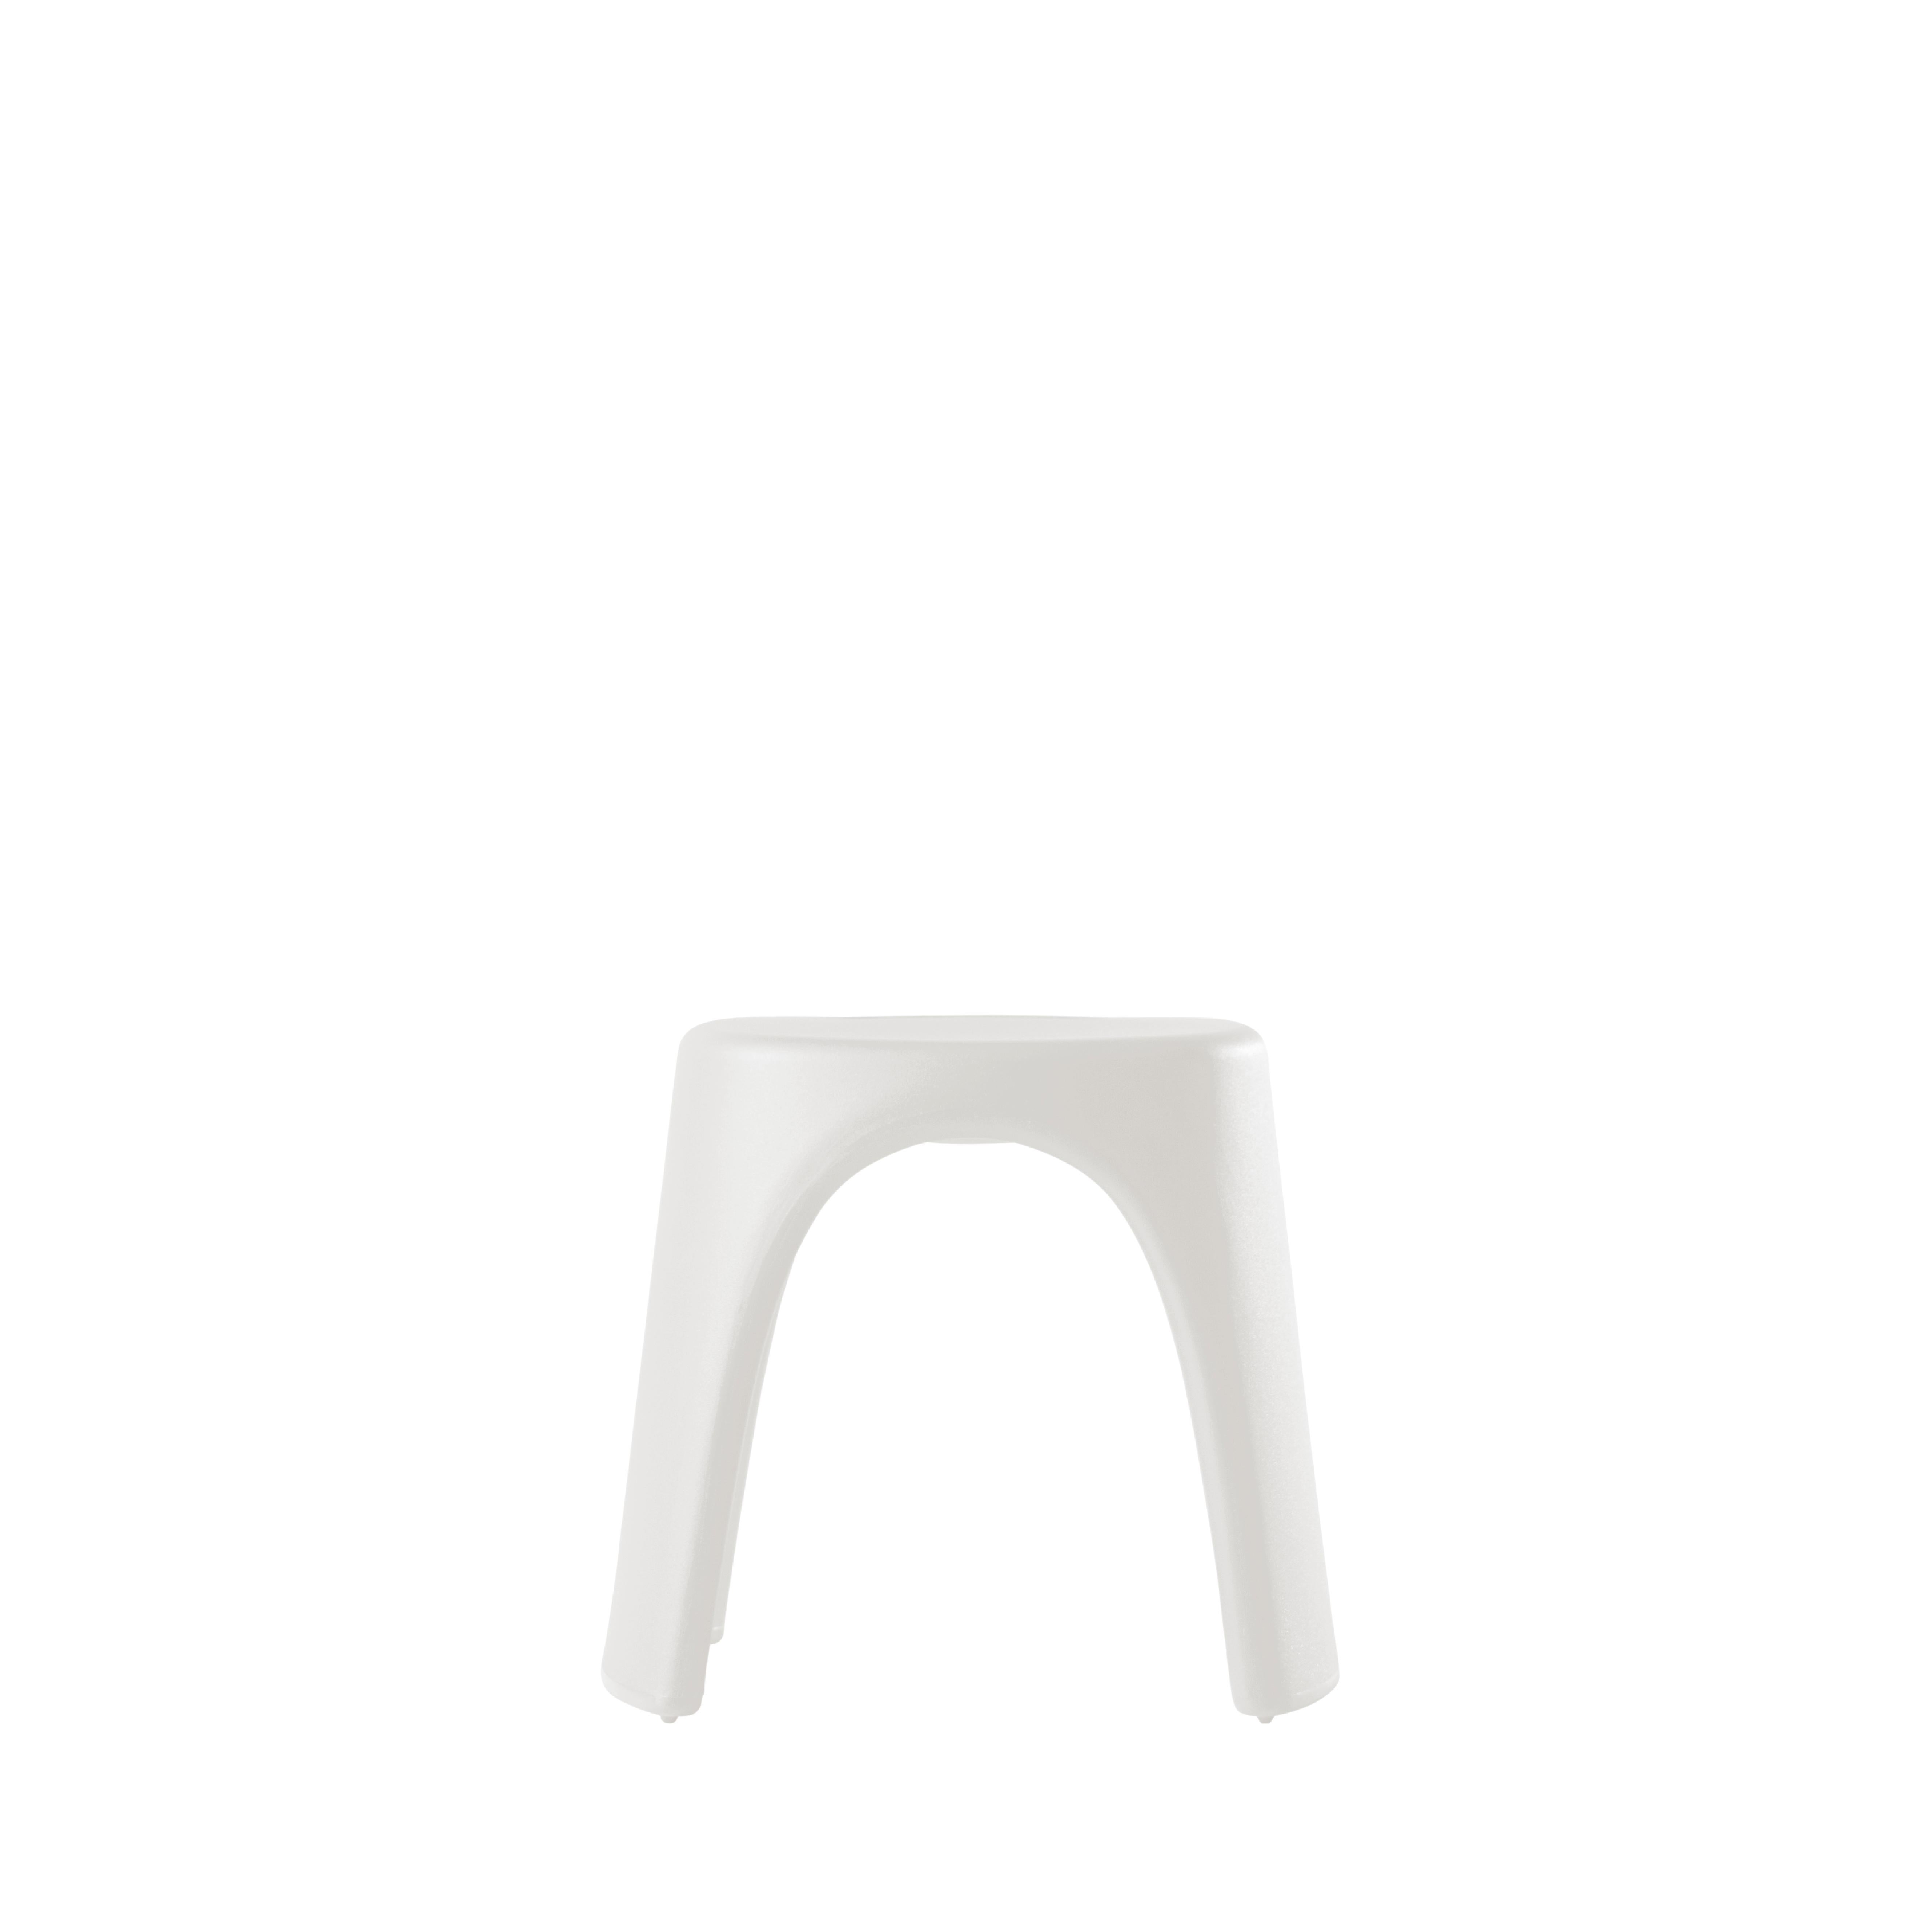 Elephant Grey Amélie Sgabello Stool by Italo Pertichini
Dimensions: D 40 x W 46 x H 43 cm.
Materials: Polyethylene.
Weight: 4 kg.

Available in a standard version and lacquered version. Prices may vary. Available in different color options. This